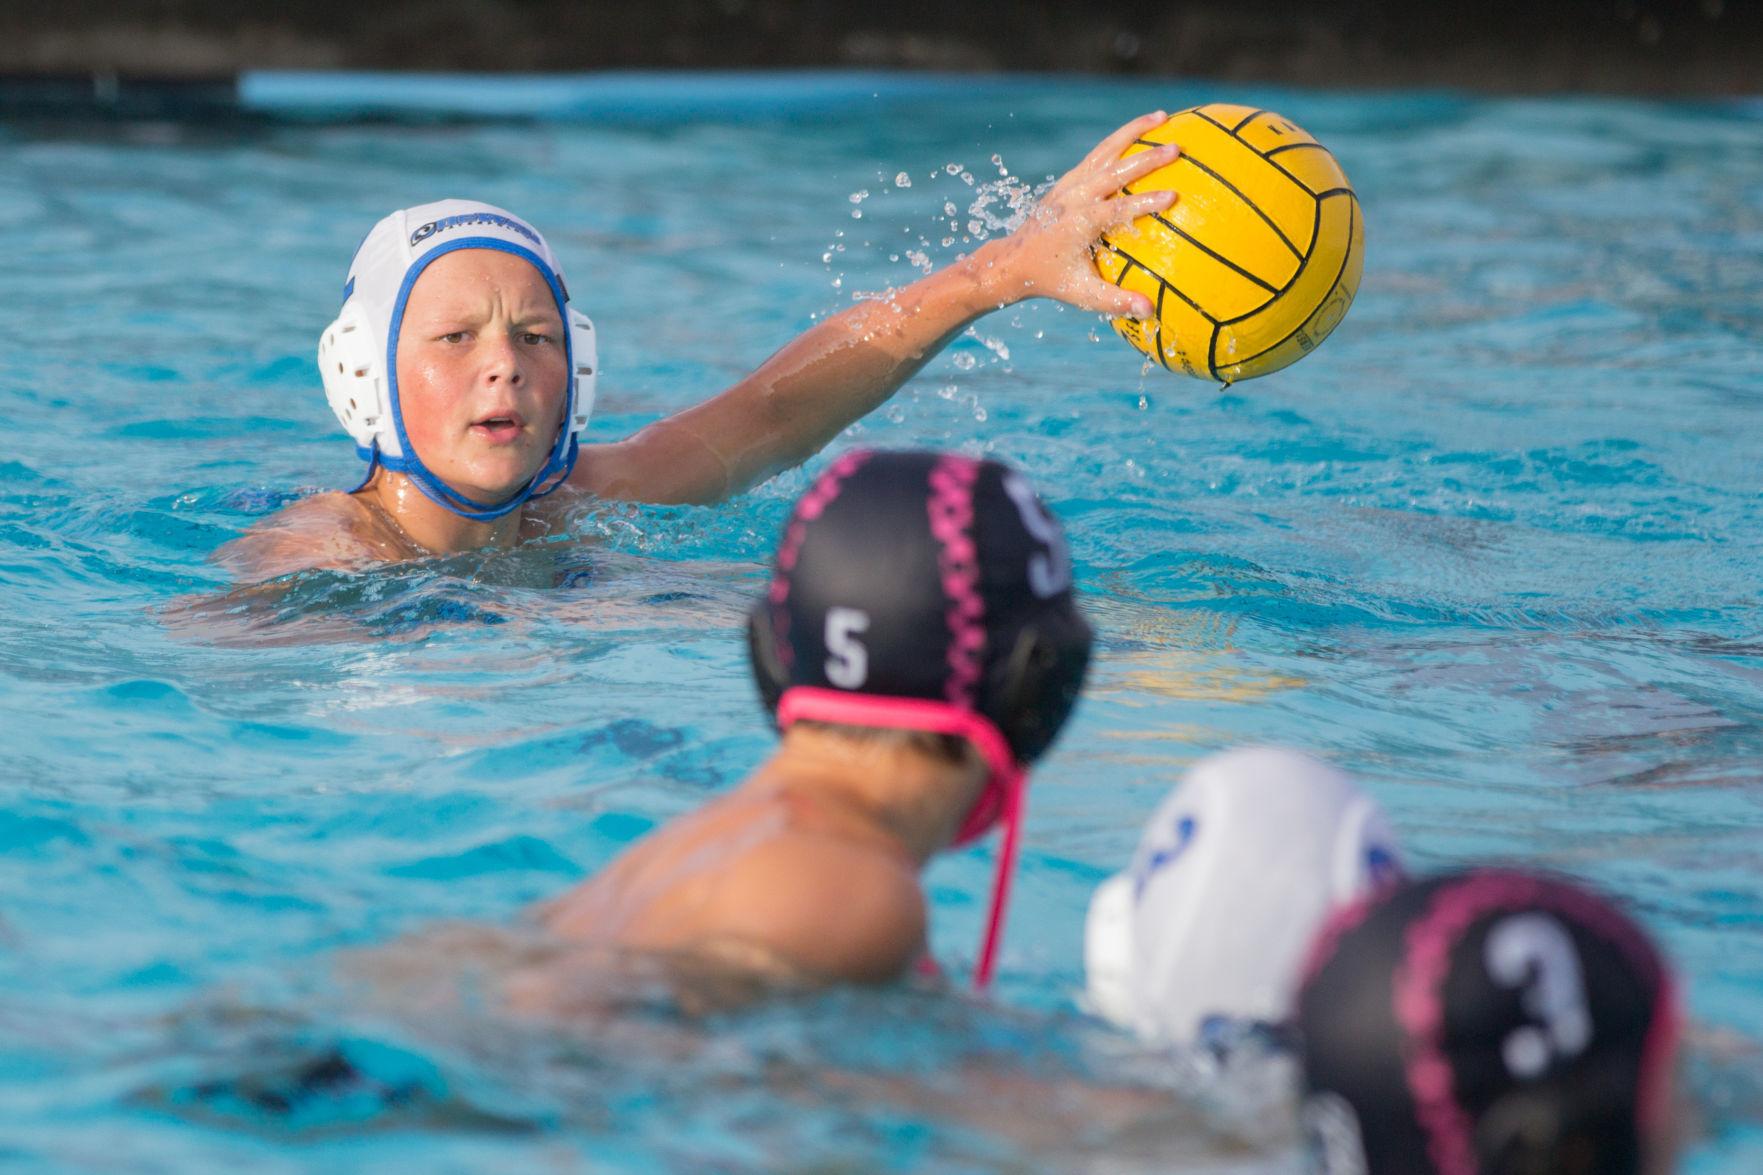 One Way boys water polo wraps up play at Junior Olympics as girls team